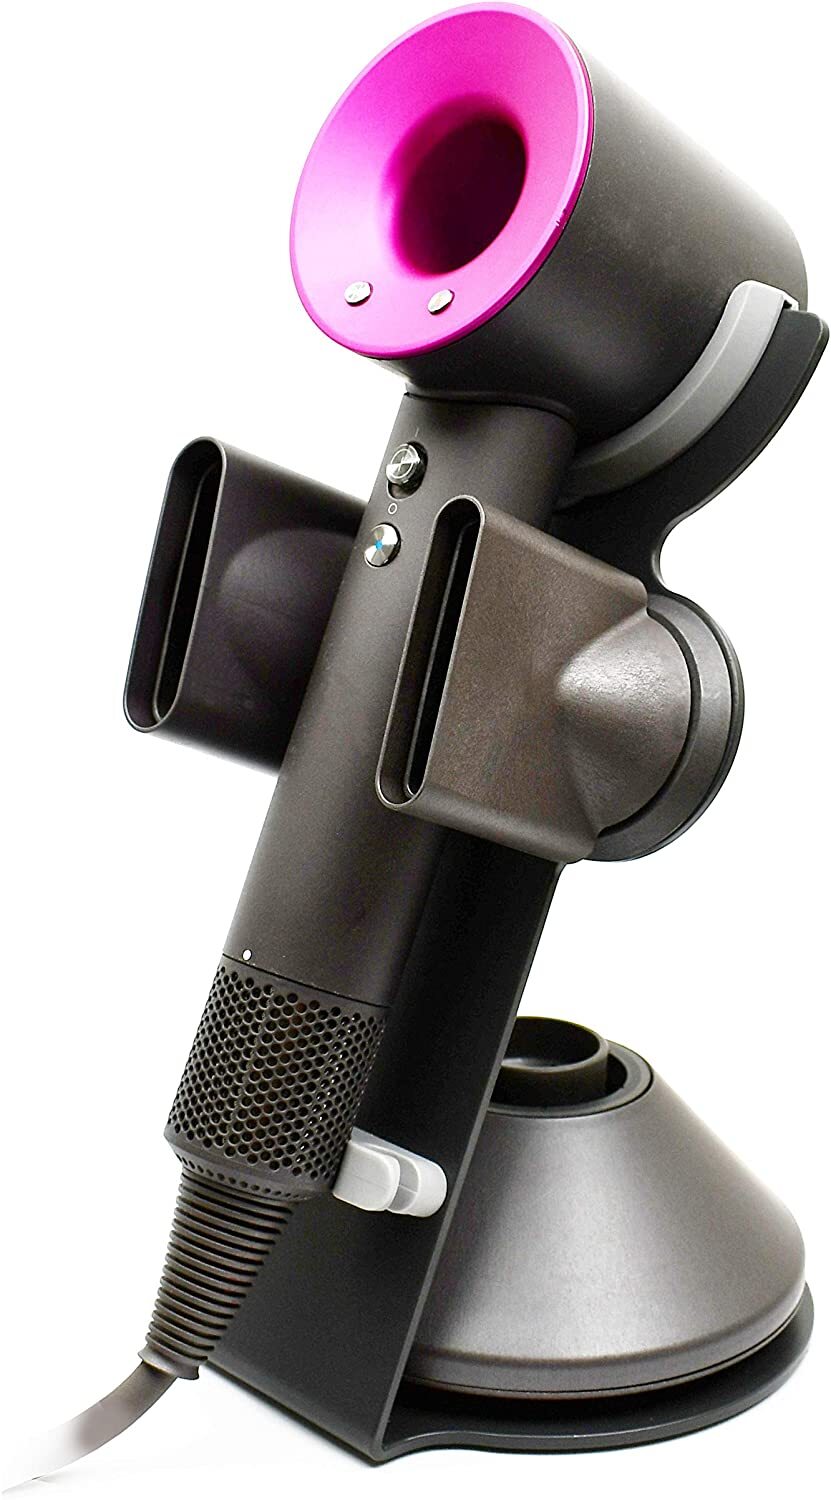 dyson hair dryer stand